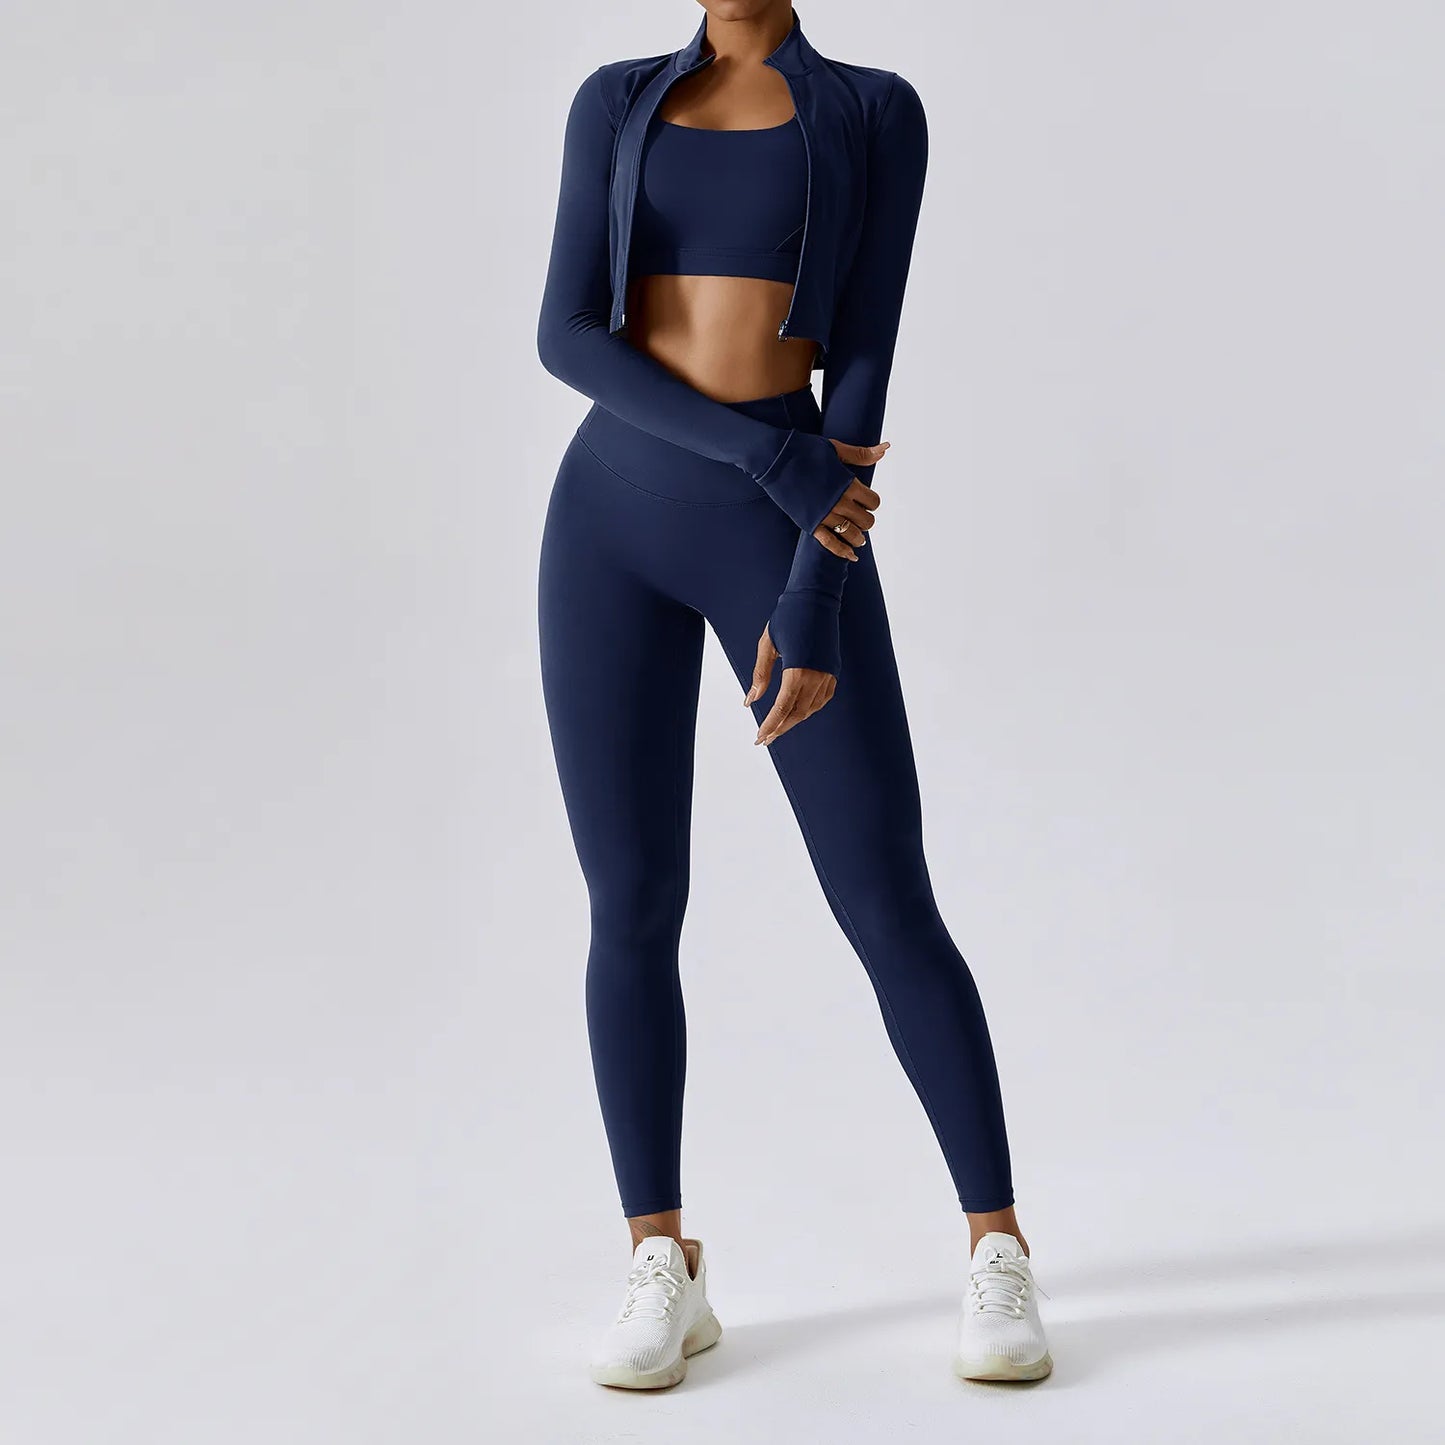 Chic Sports Top and Leggings Set - BEYOND FASHION